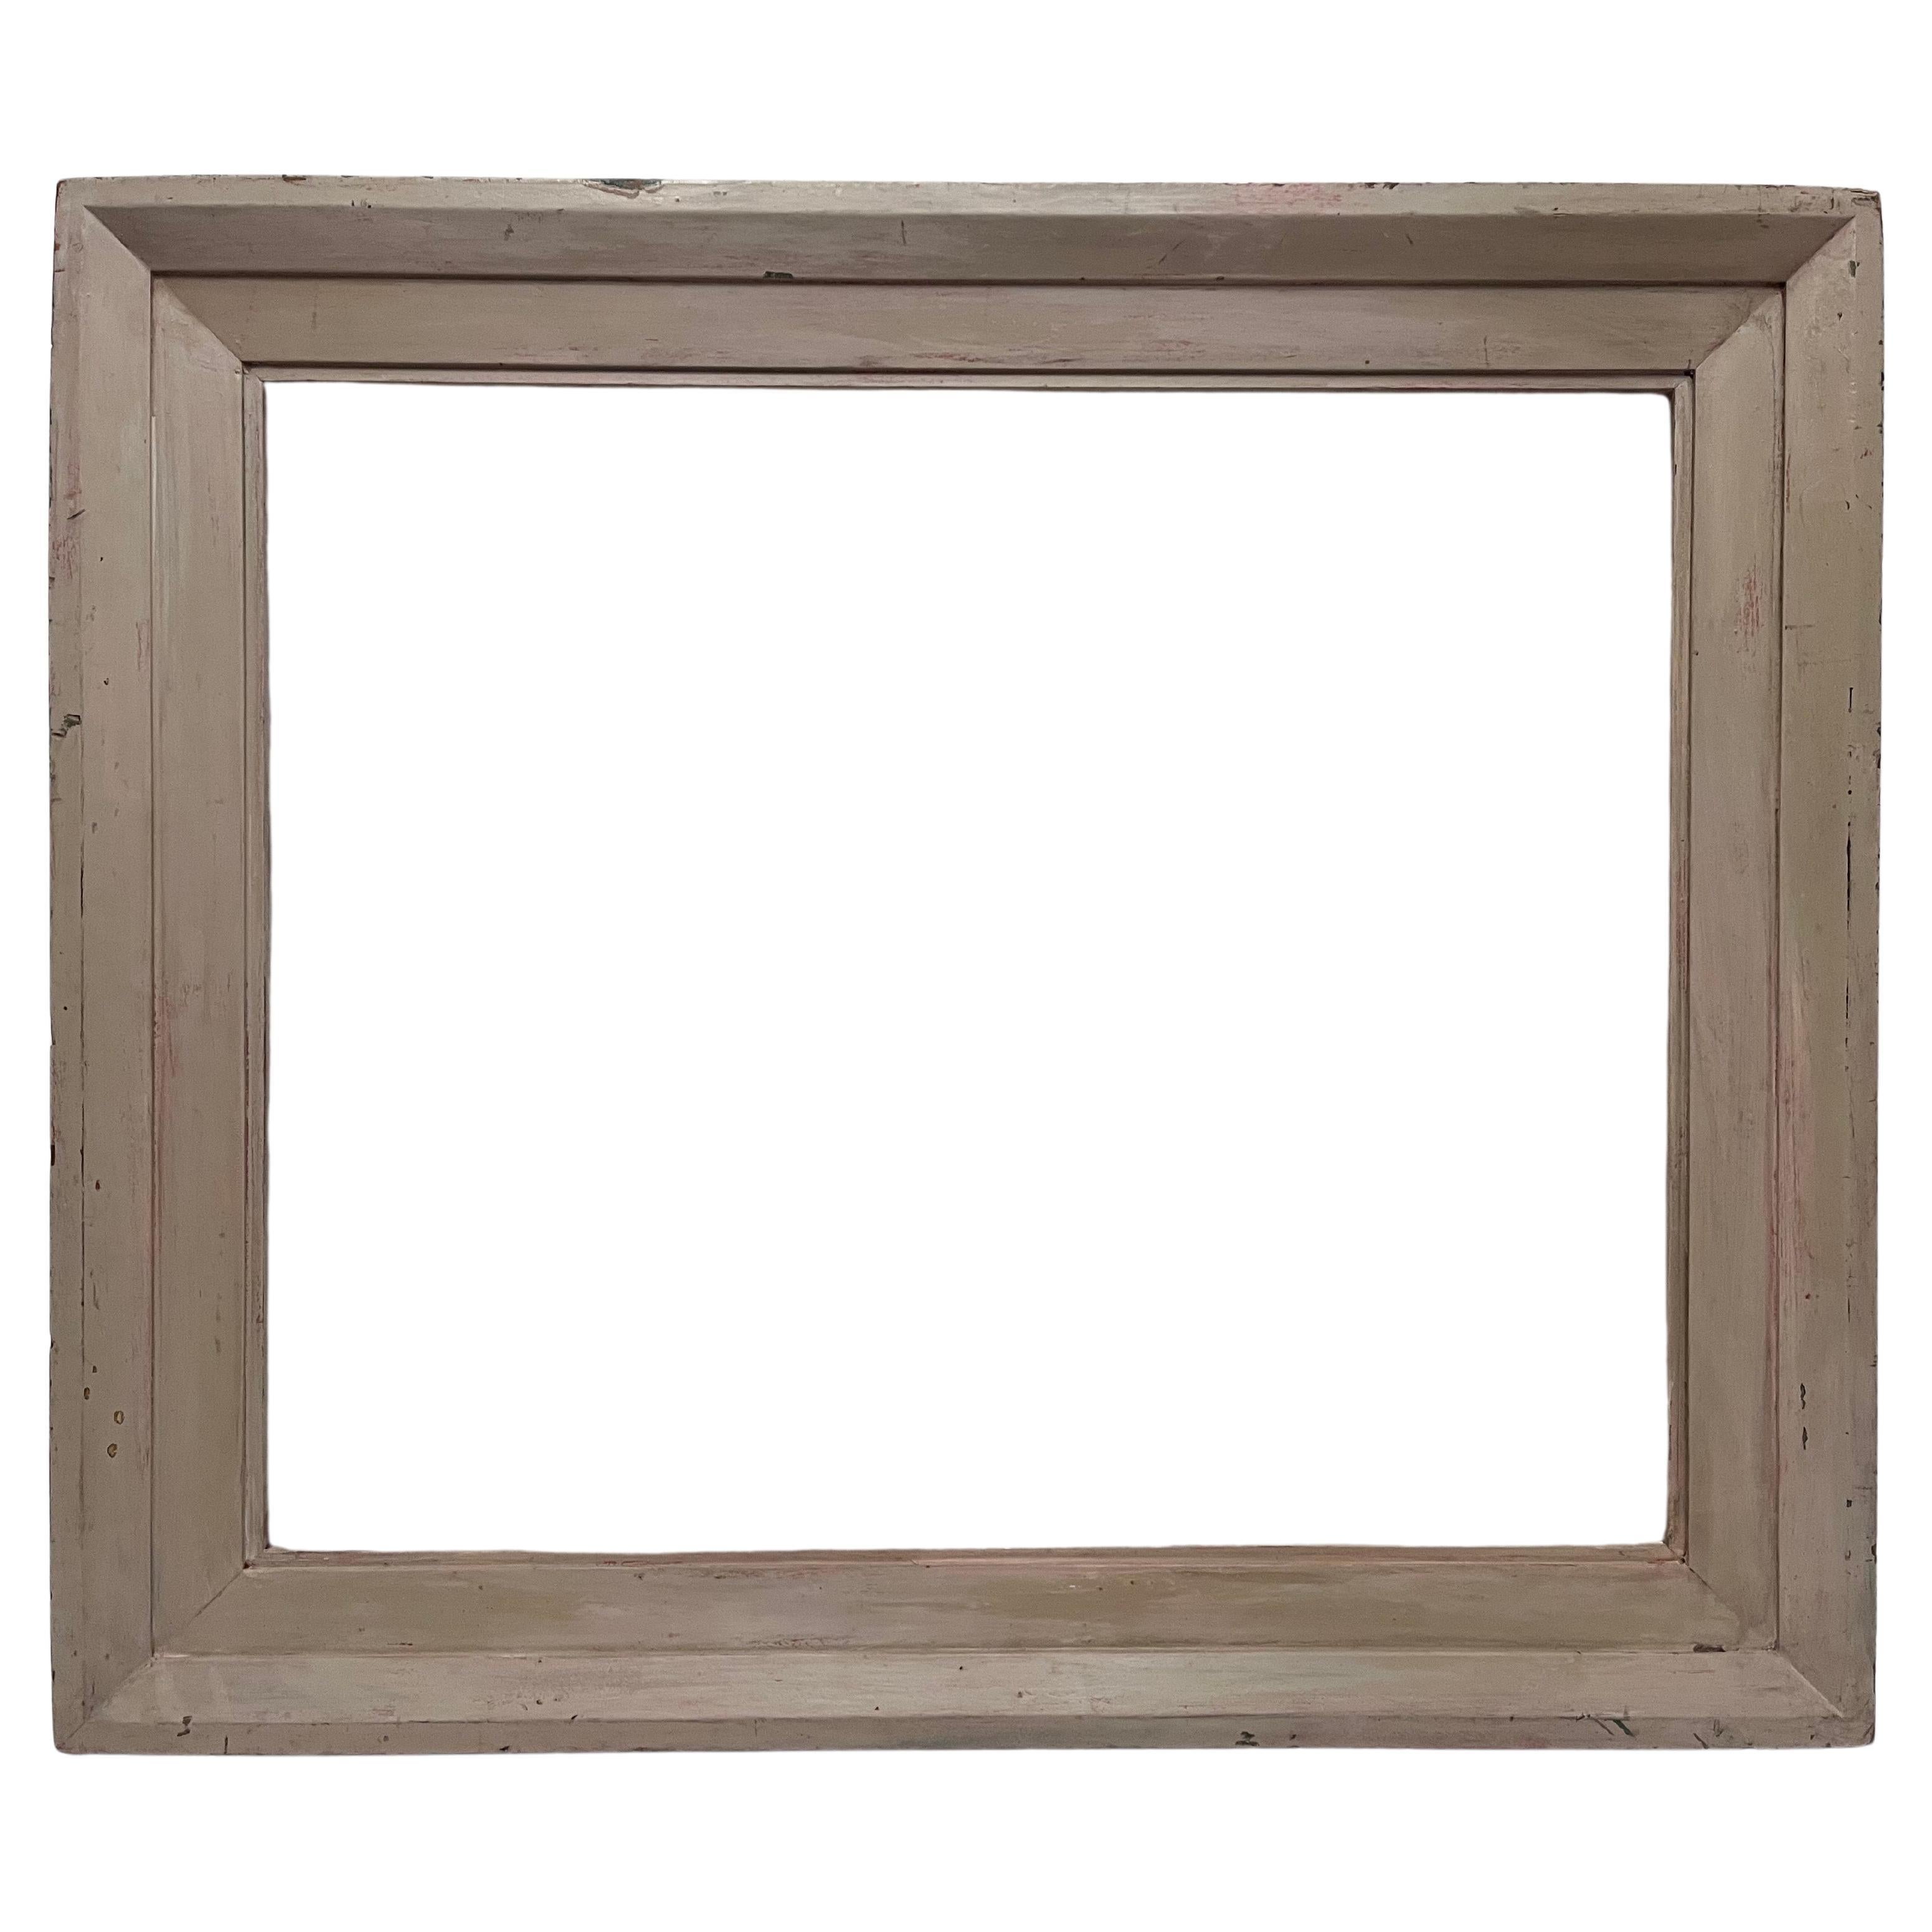 Mid 20th Century American Modernist Style White Finish Picture Frame 24 x 20 For Sale